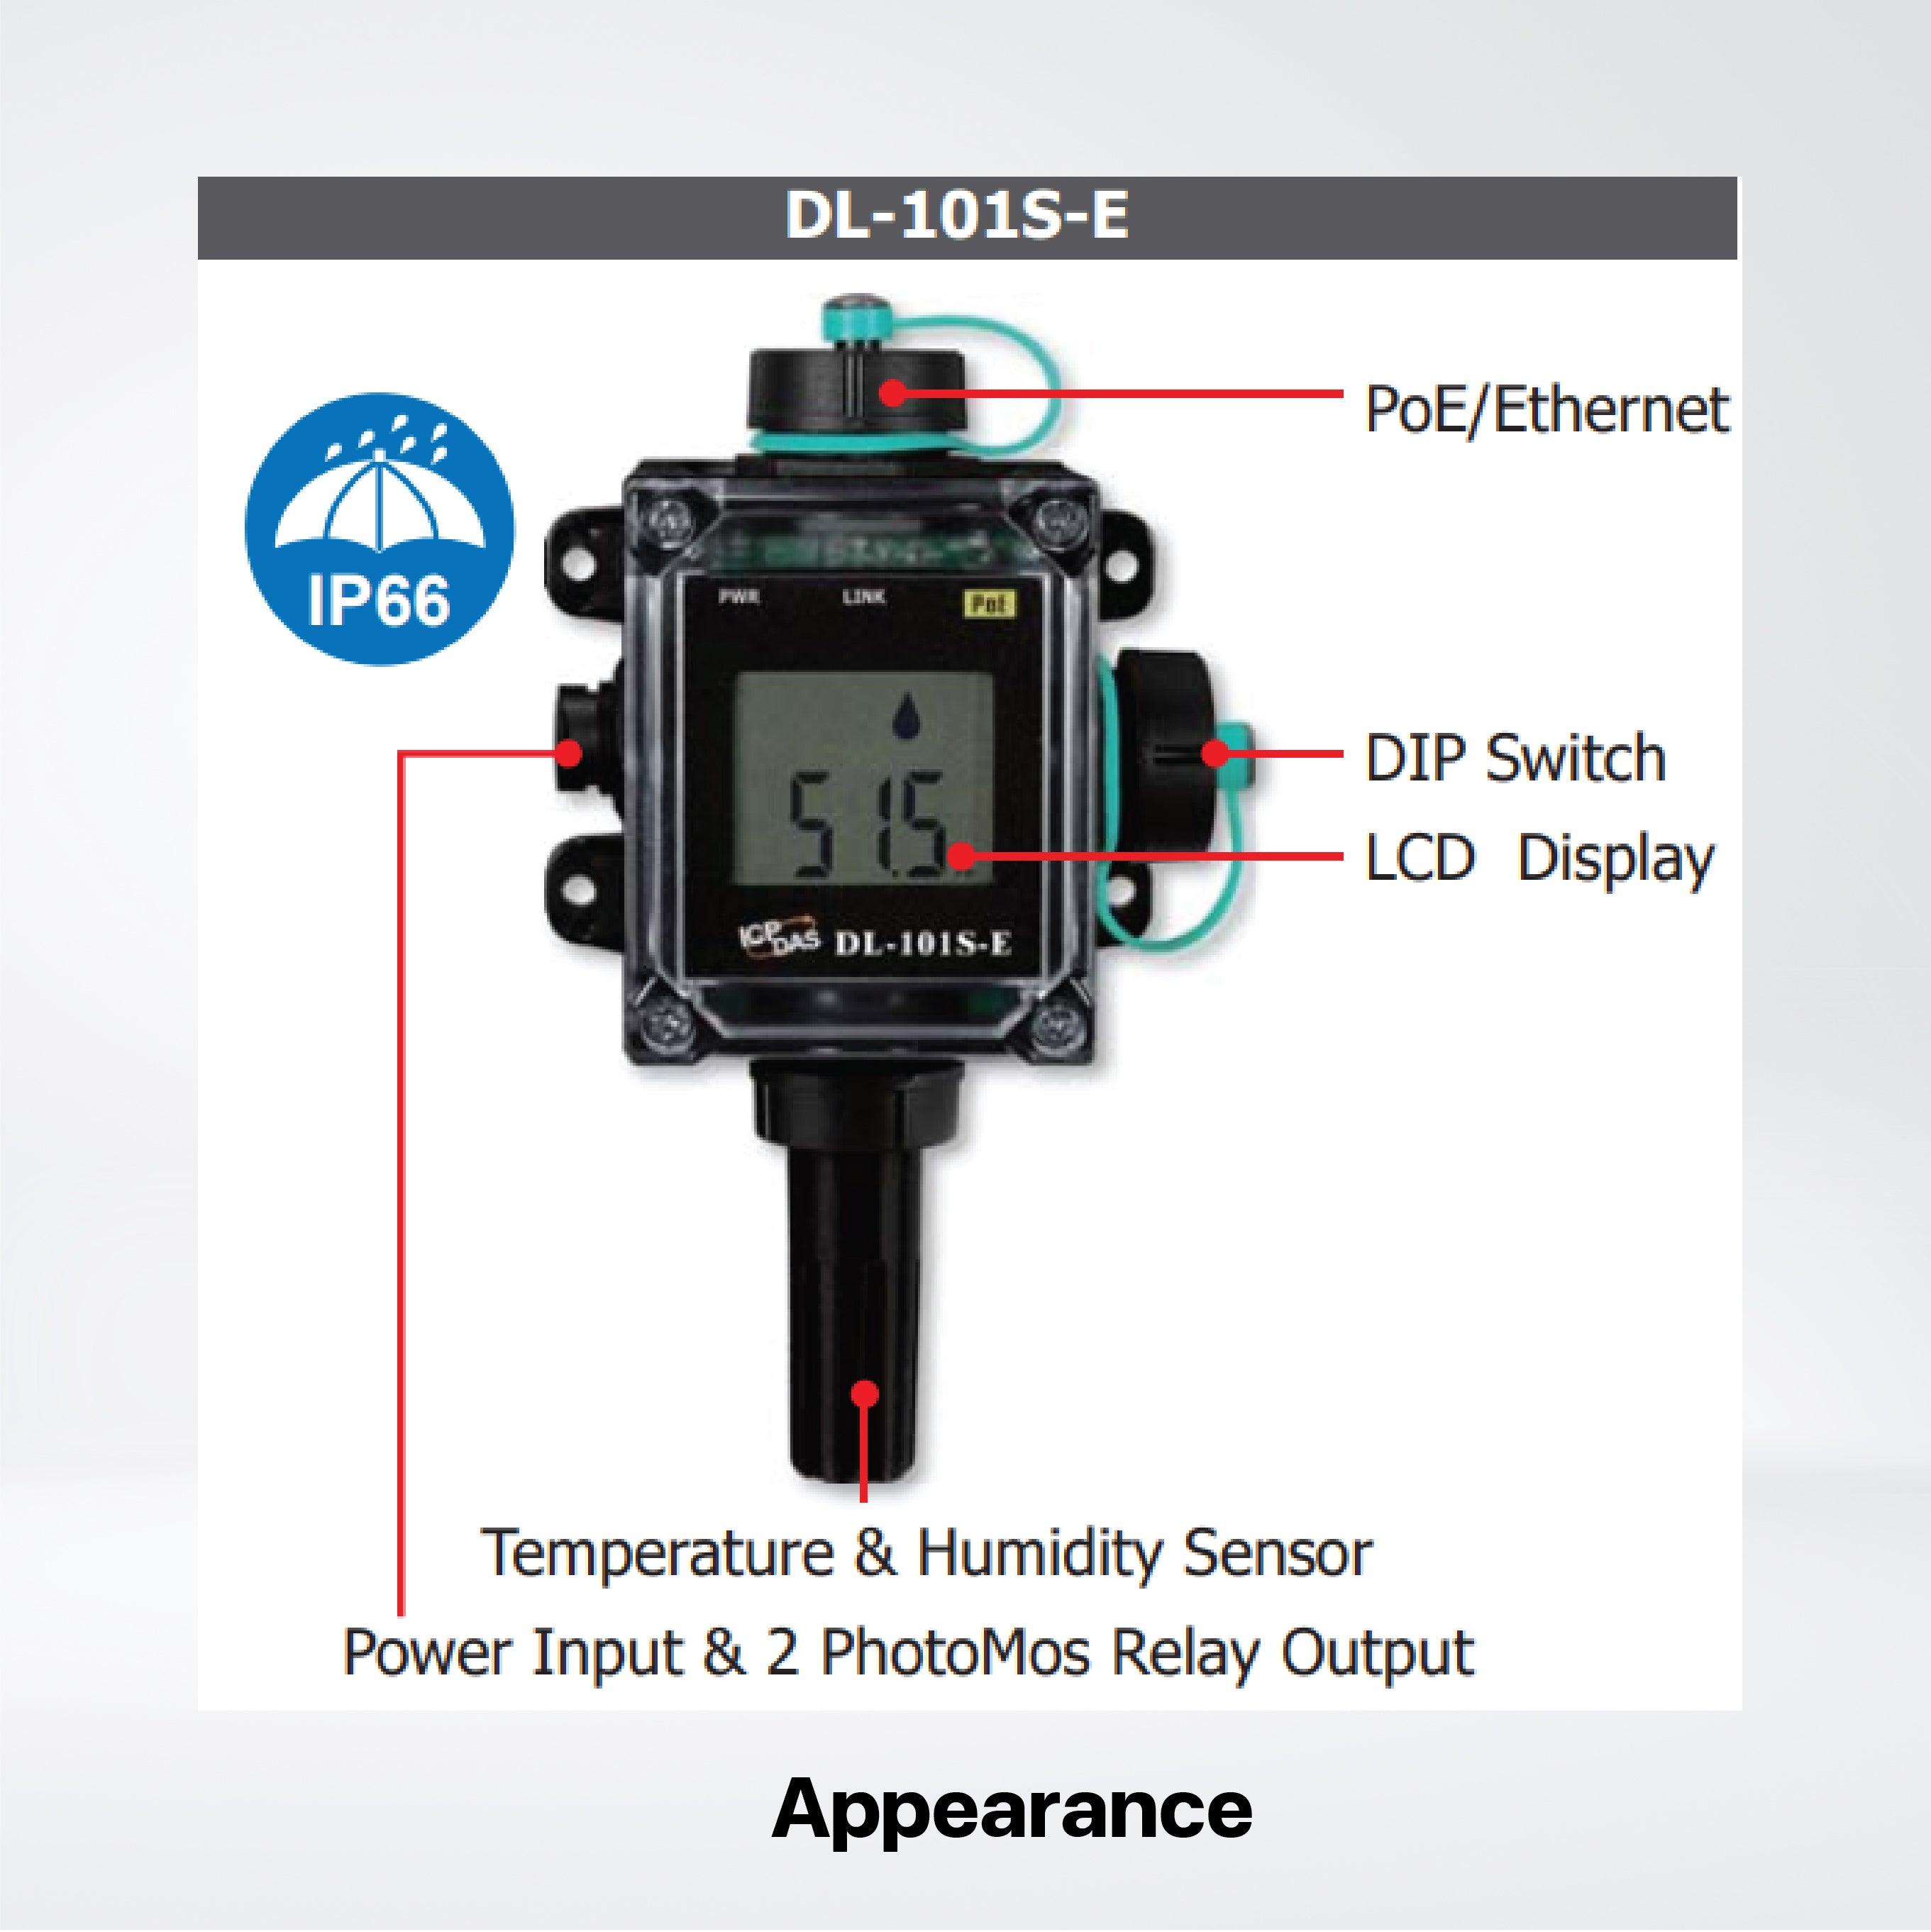 DL-101S-E IP66 Remote Temperature/Humidity/Dew Point Data Logger - Riverplus